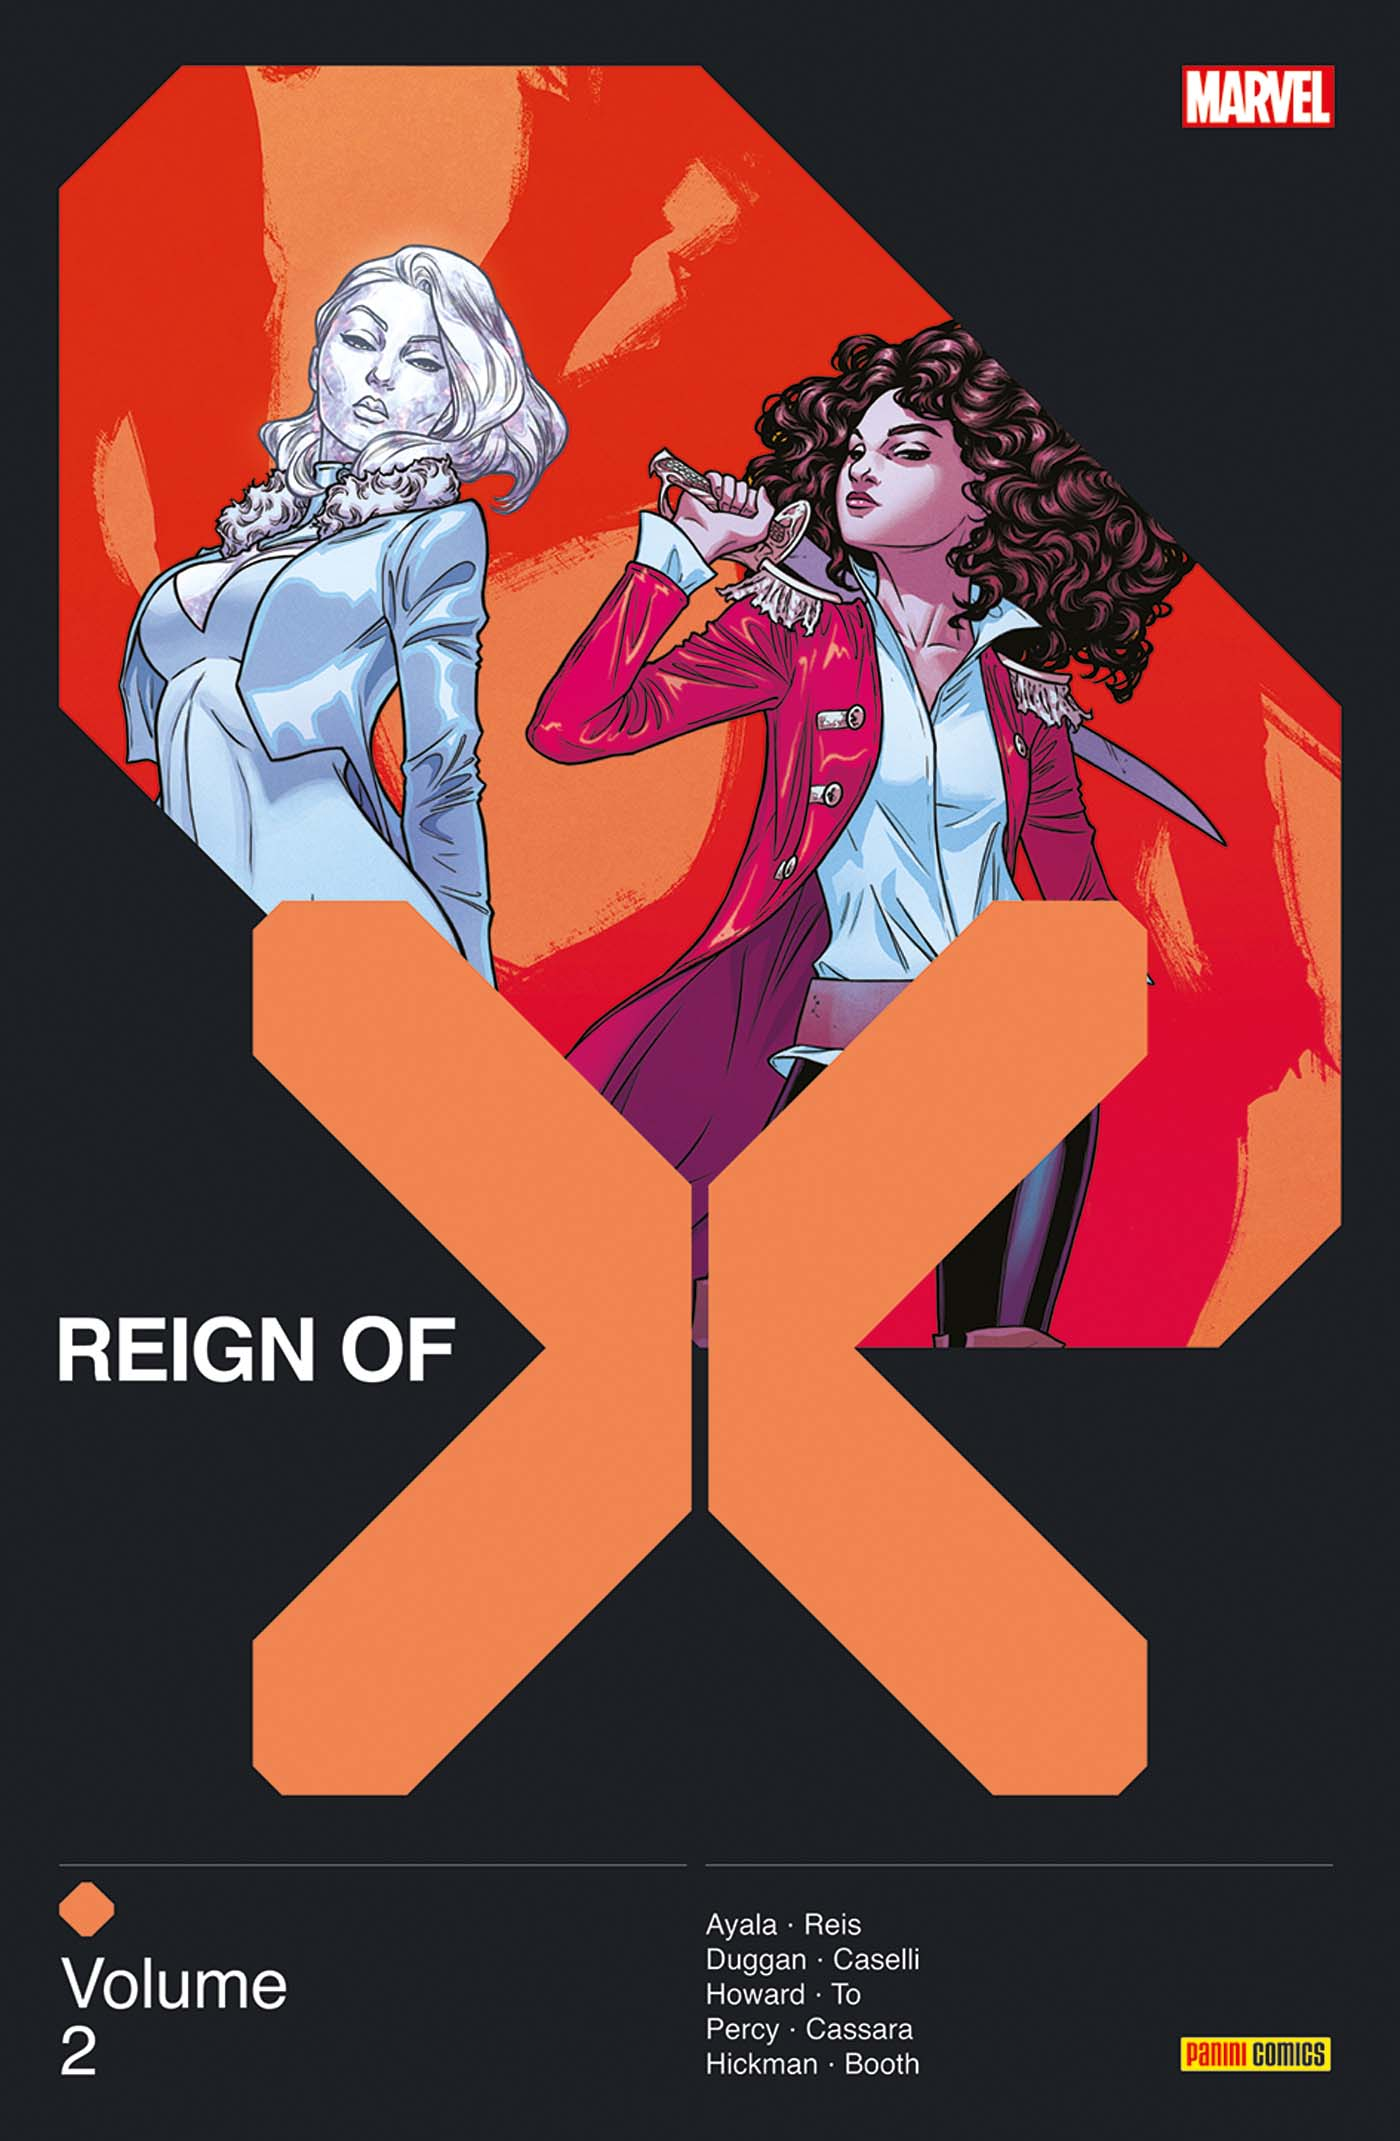 Reign of X Tome 2 (VF)